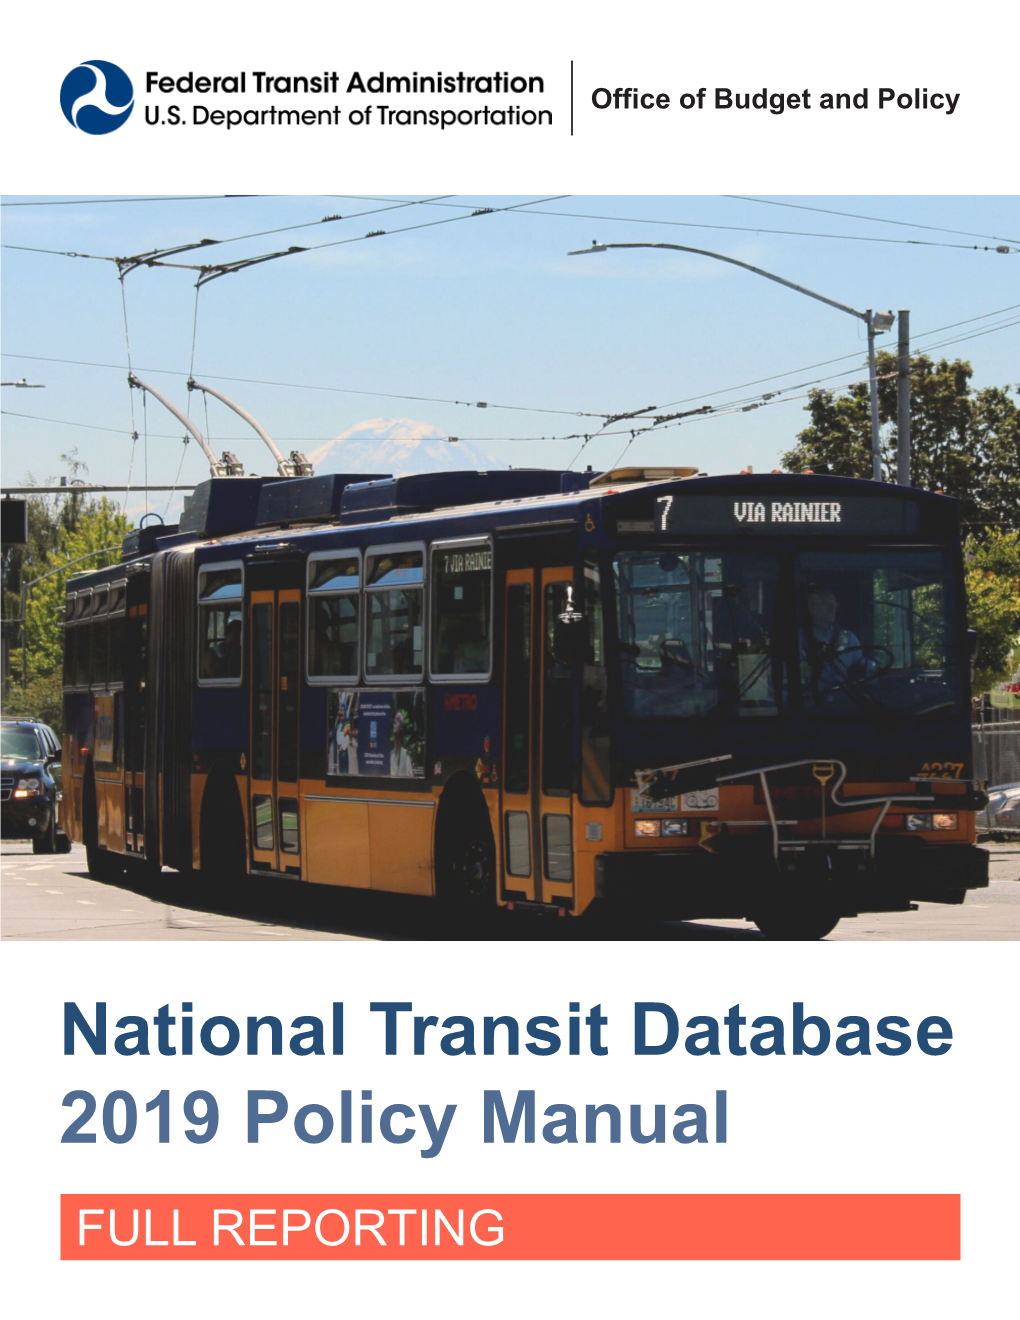 2019 NTD Reporting Policy Manual